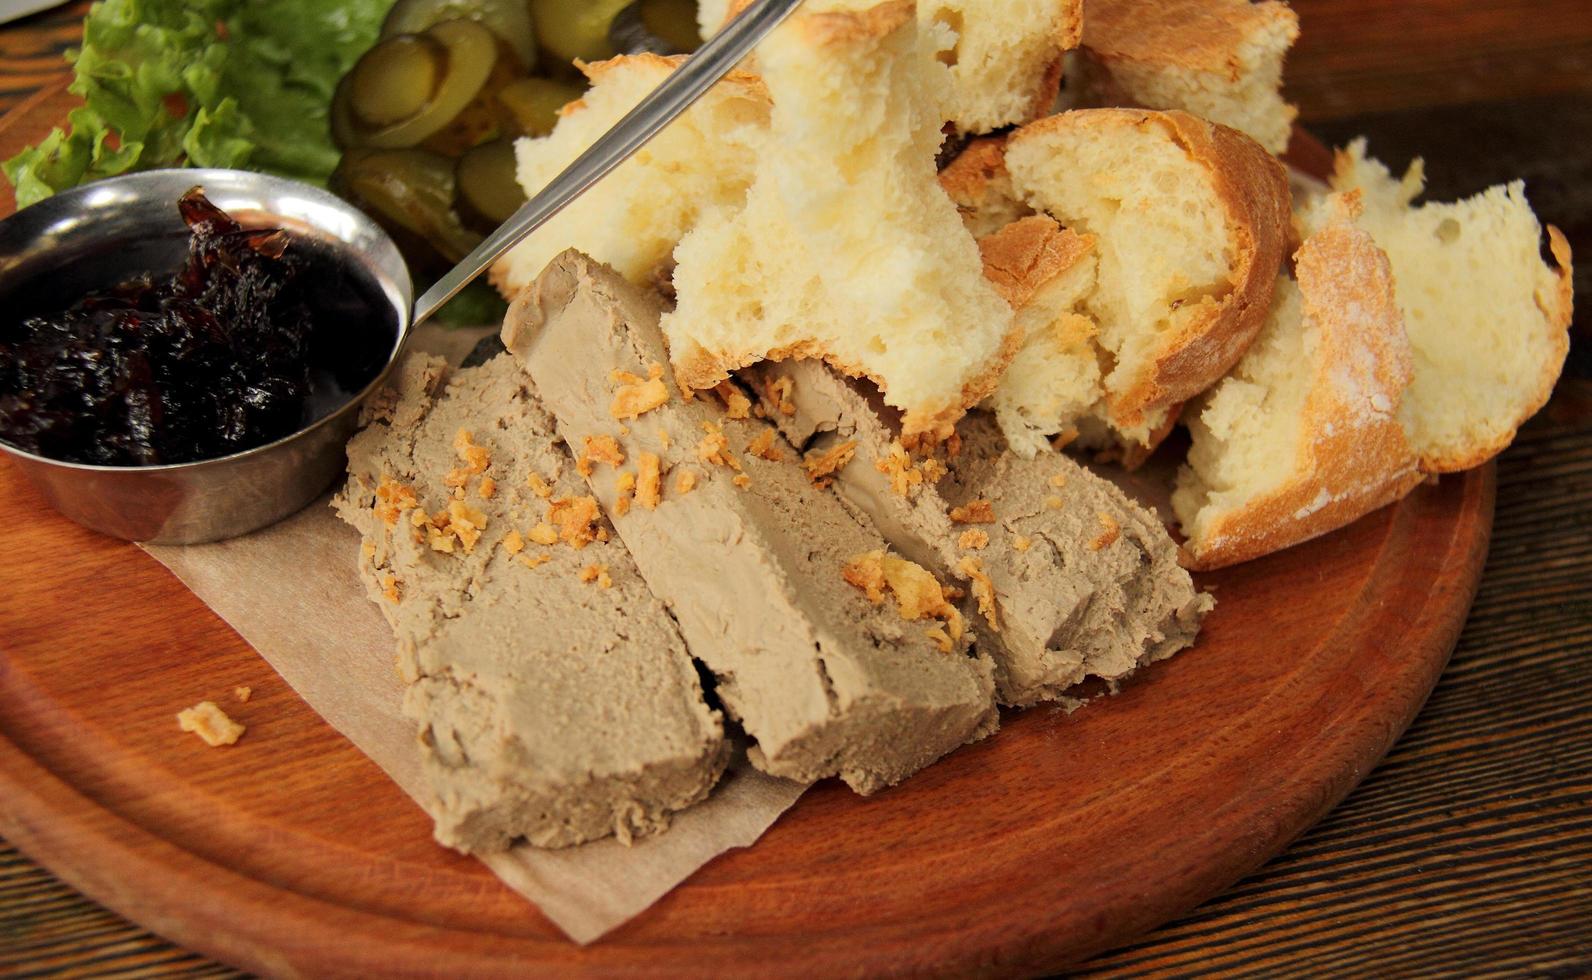 Pate with bread and pickles on wooden tray photo